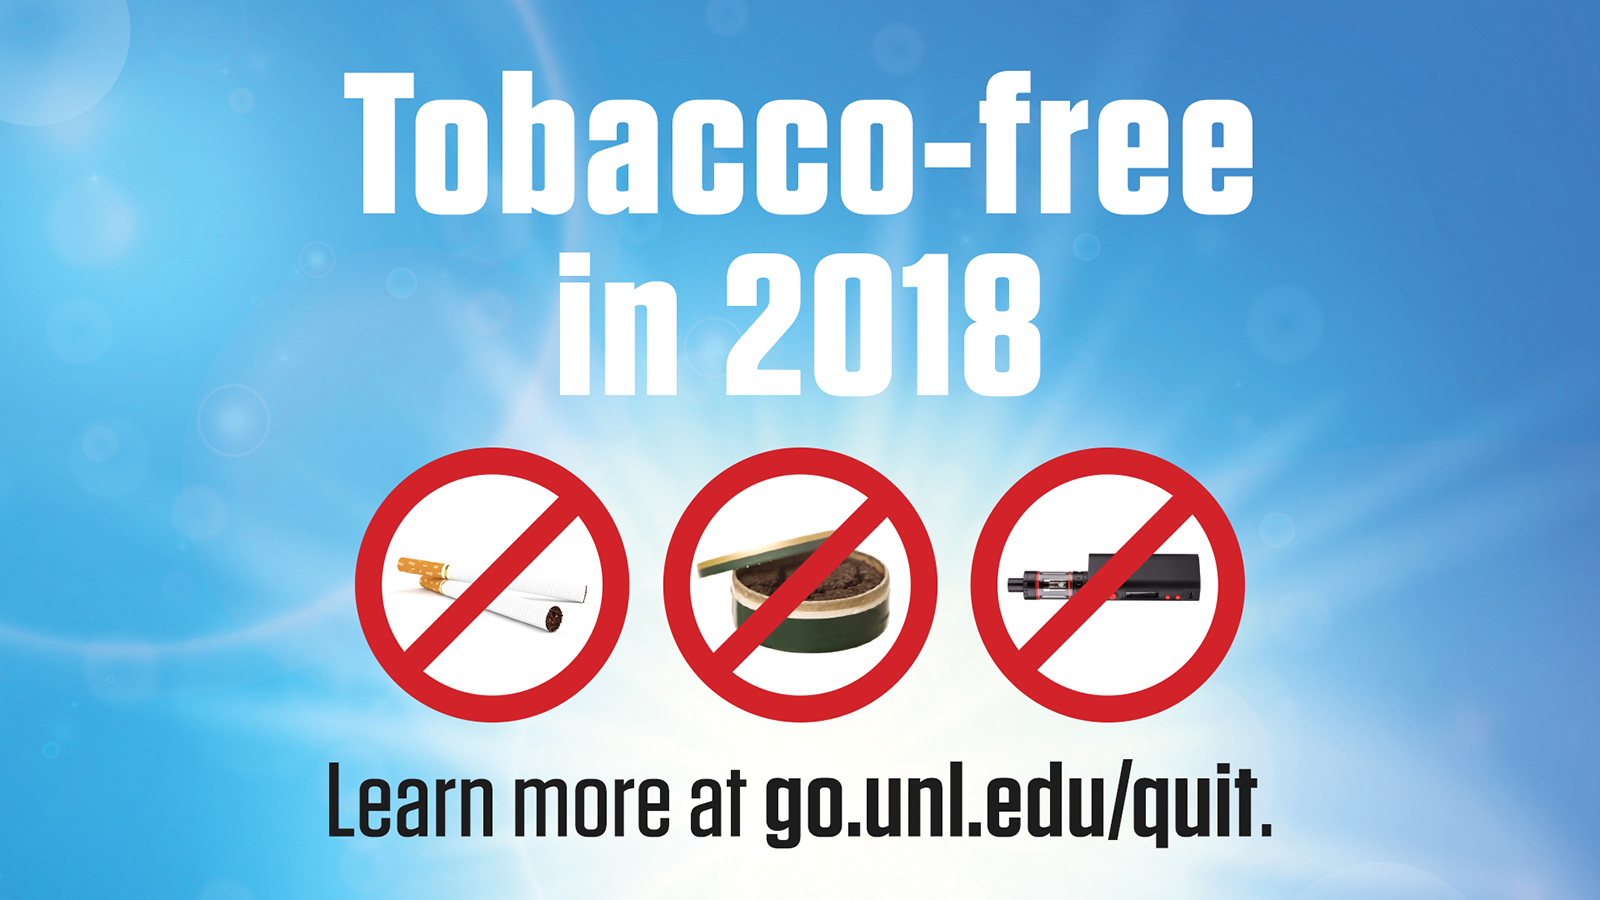 Campuswide ban of tobacco products begins Jan. 1, 2018.